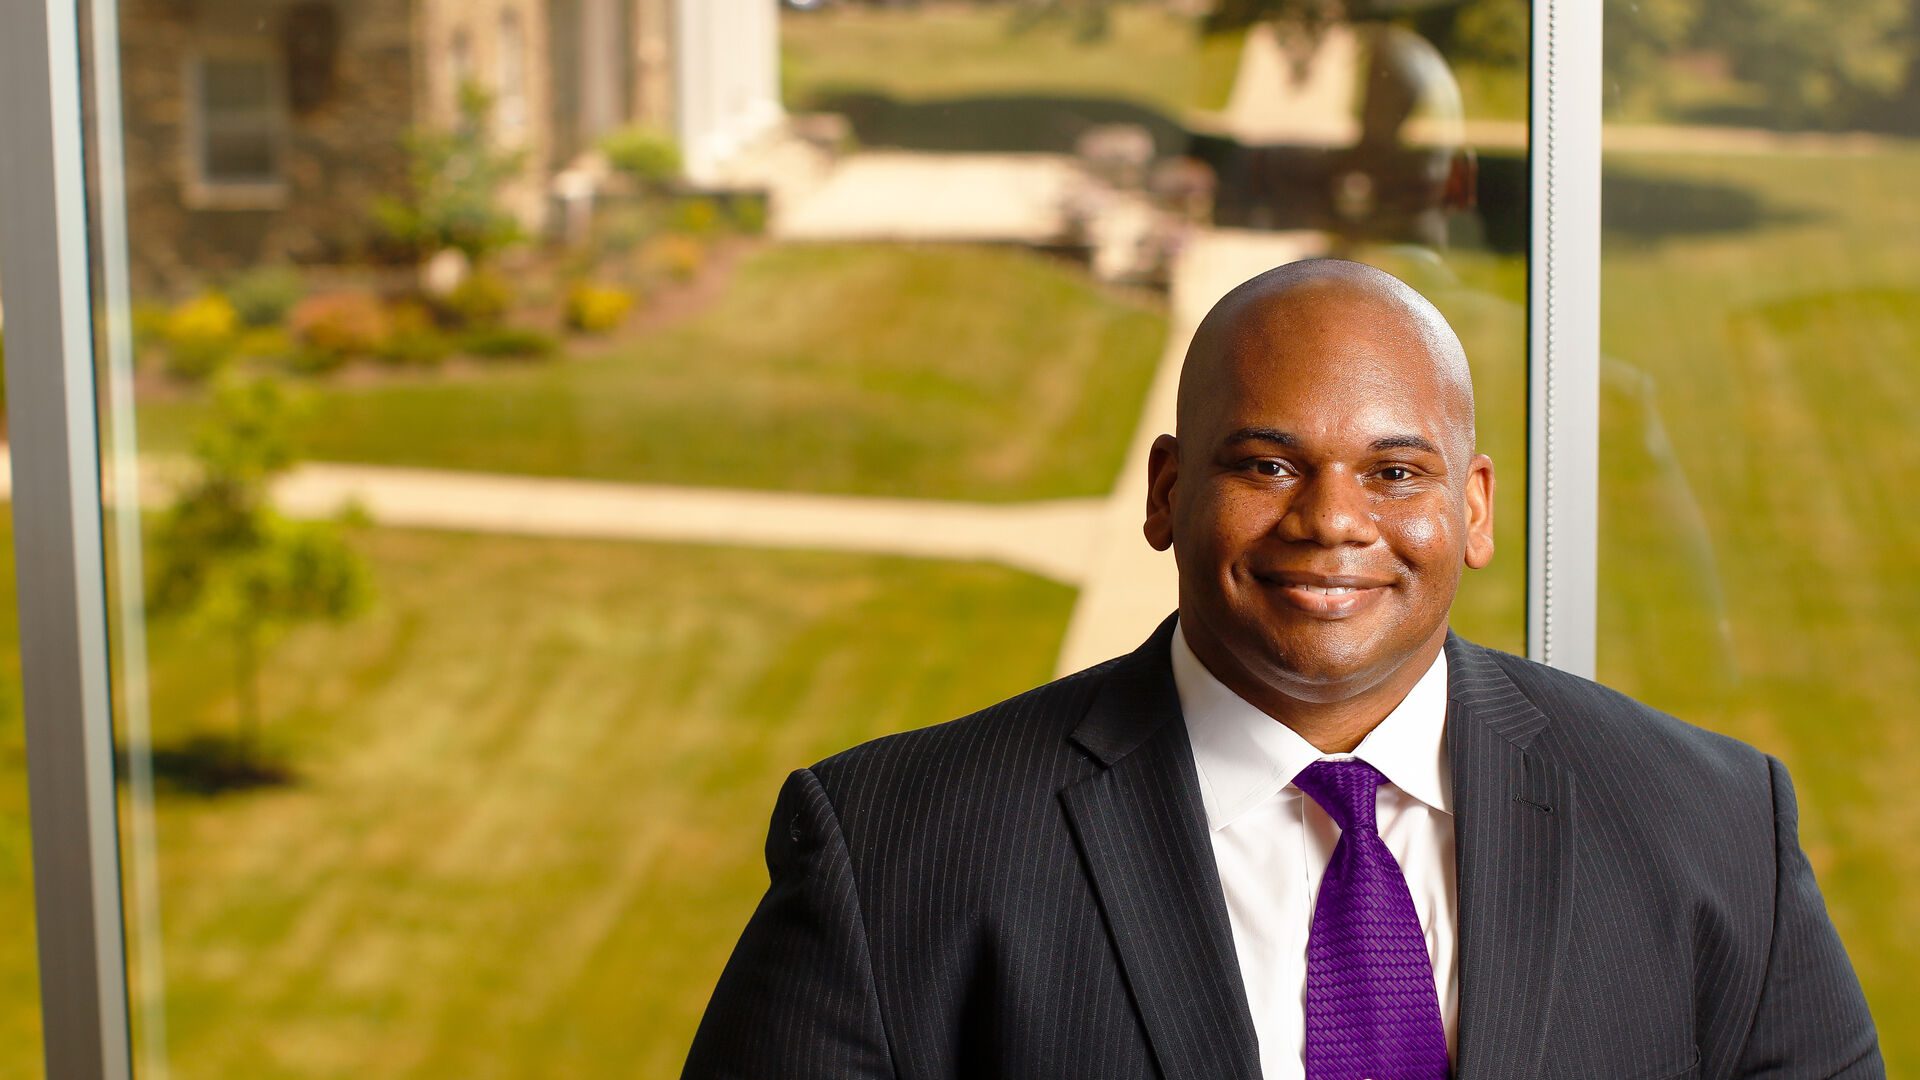 President Lewis on Houghton's campus wearing pinstripe suit and purple tie.